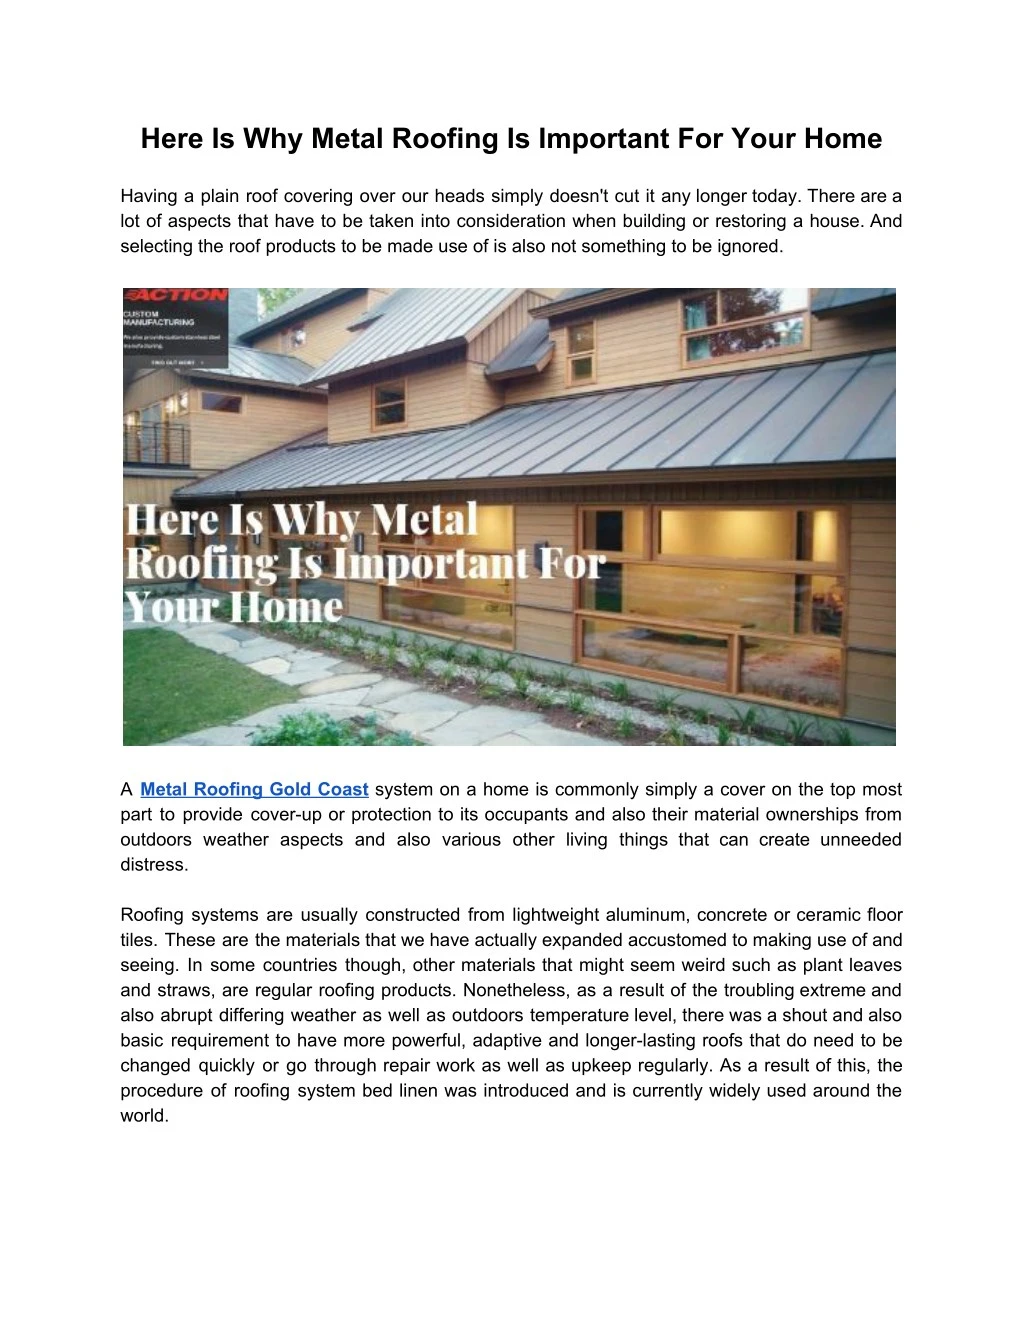 here is why metal roofing is important for your